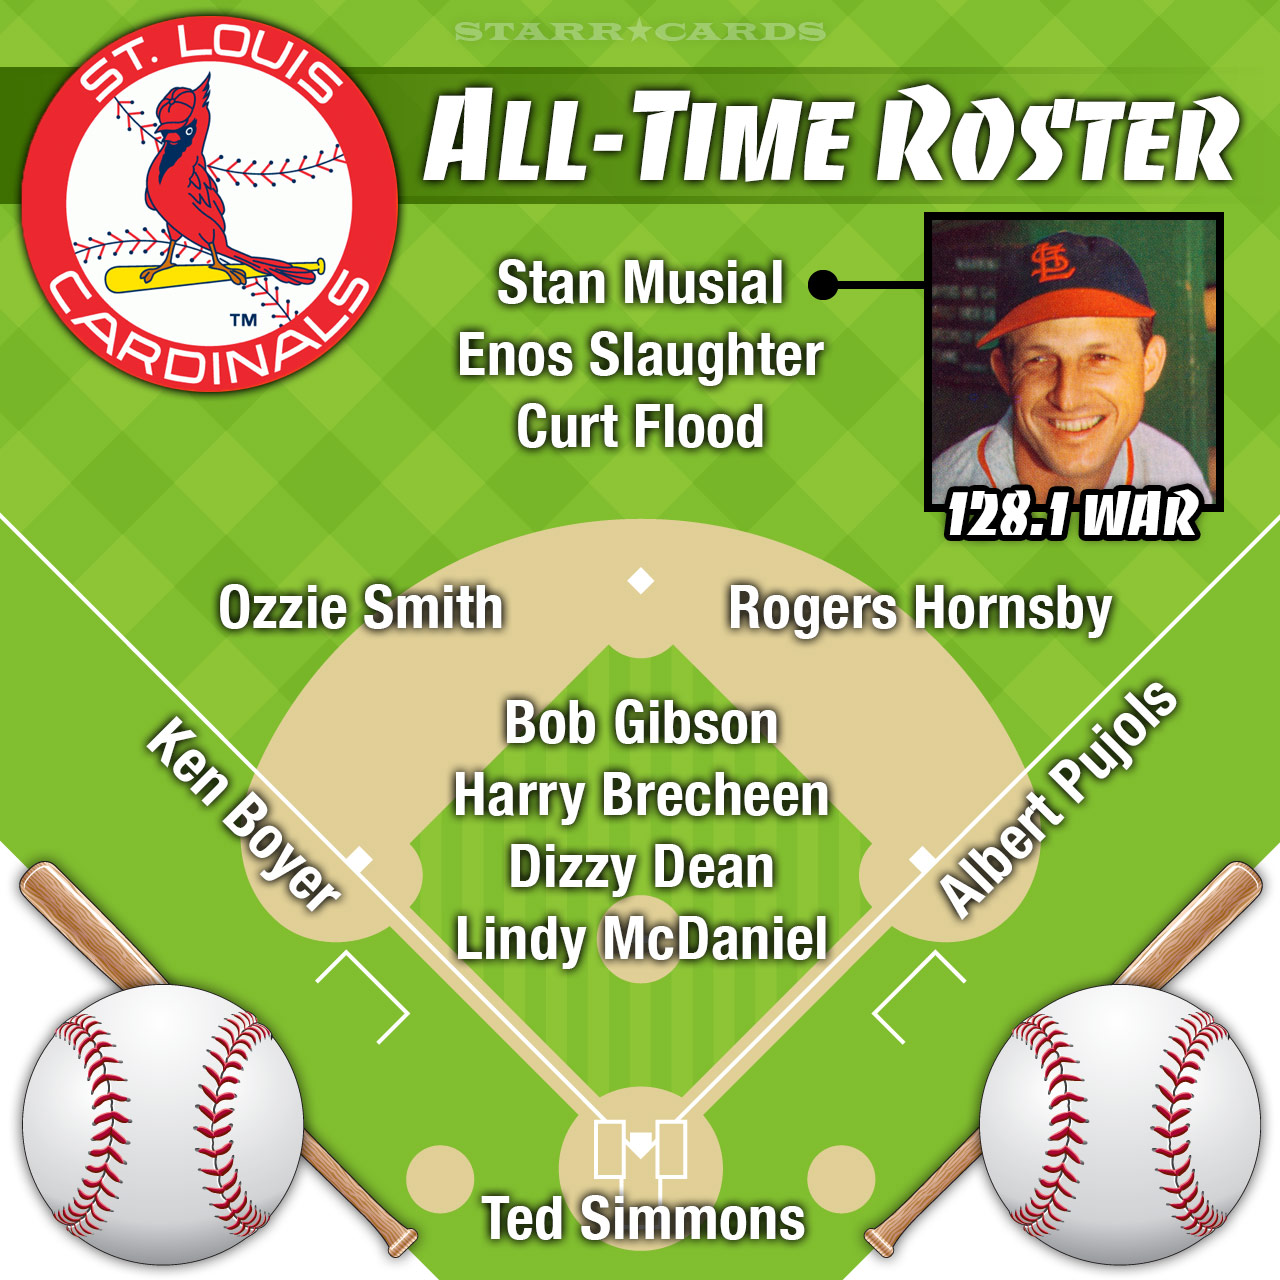 Stan Musial headlines St Louis Cardinals all-time roster by WAR